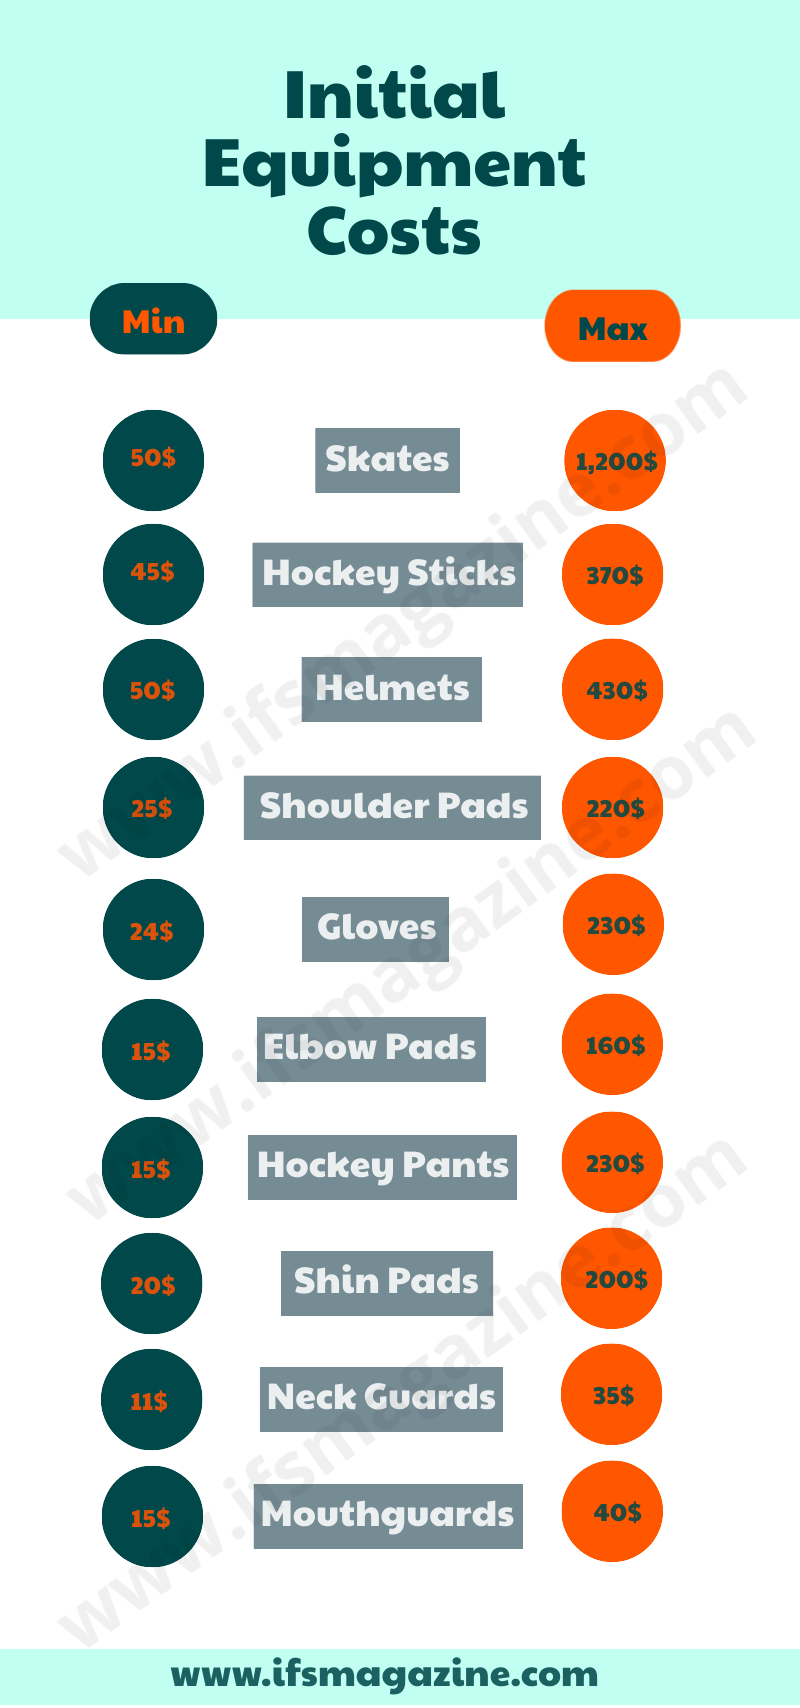 This infographic show how much cost hockey equipment